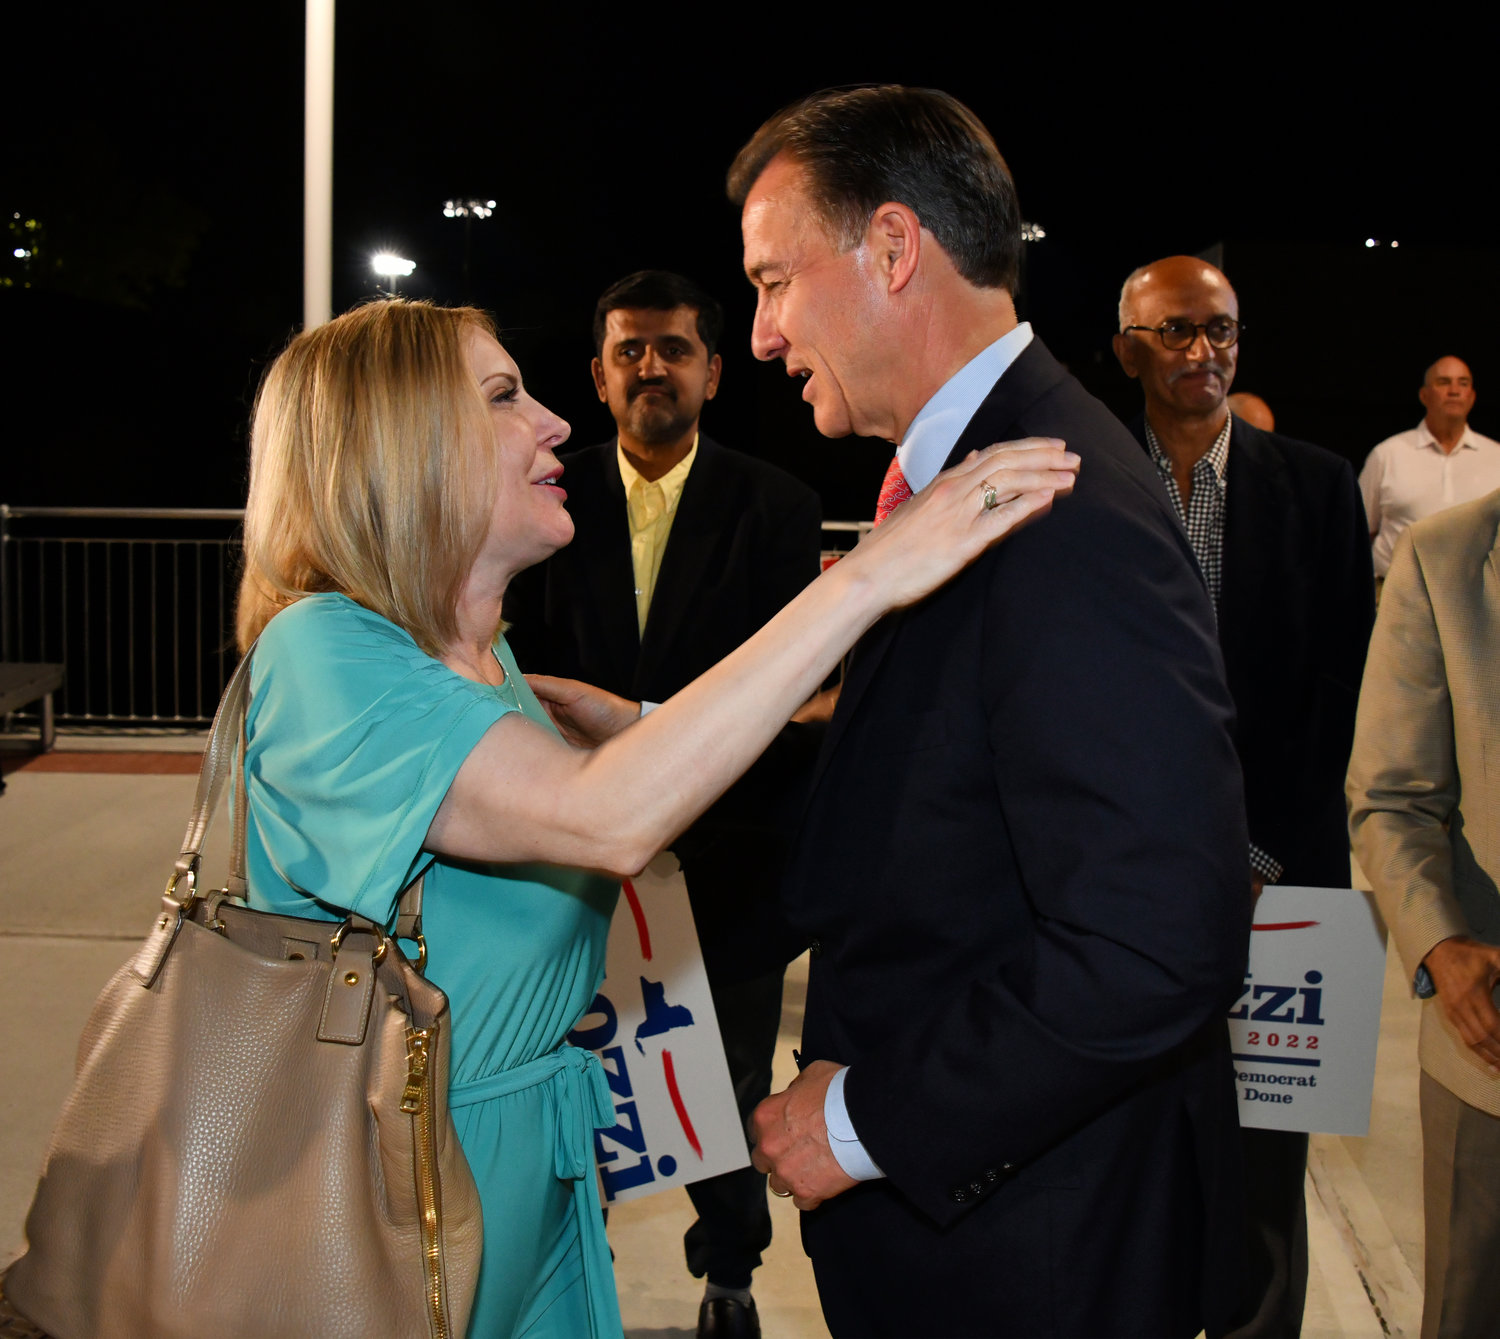 ormer Glen Cove City Councilwoman Dr. Eve Lupenko Ferrante consoled Tom Suozzi, who lost by a wide margin in the Democratic primary on Tuesday. She and many supporters waited for Suozzi until 10:30 pm. at Garvies Point Brewery and Restaurant.